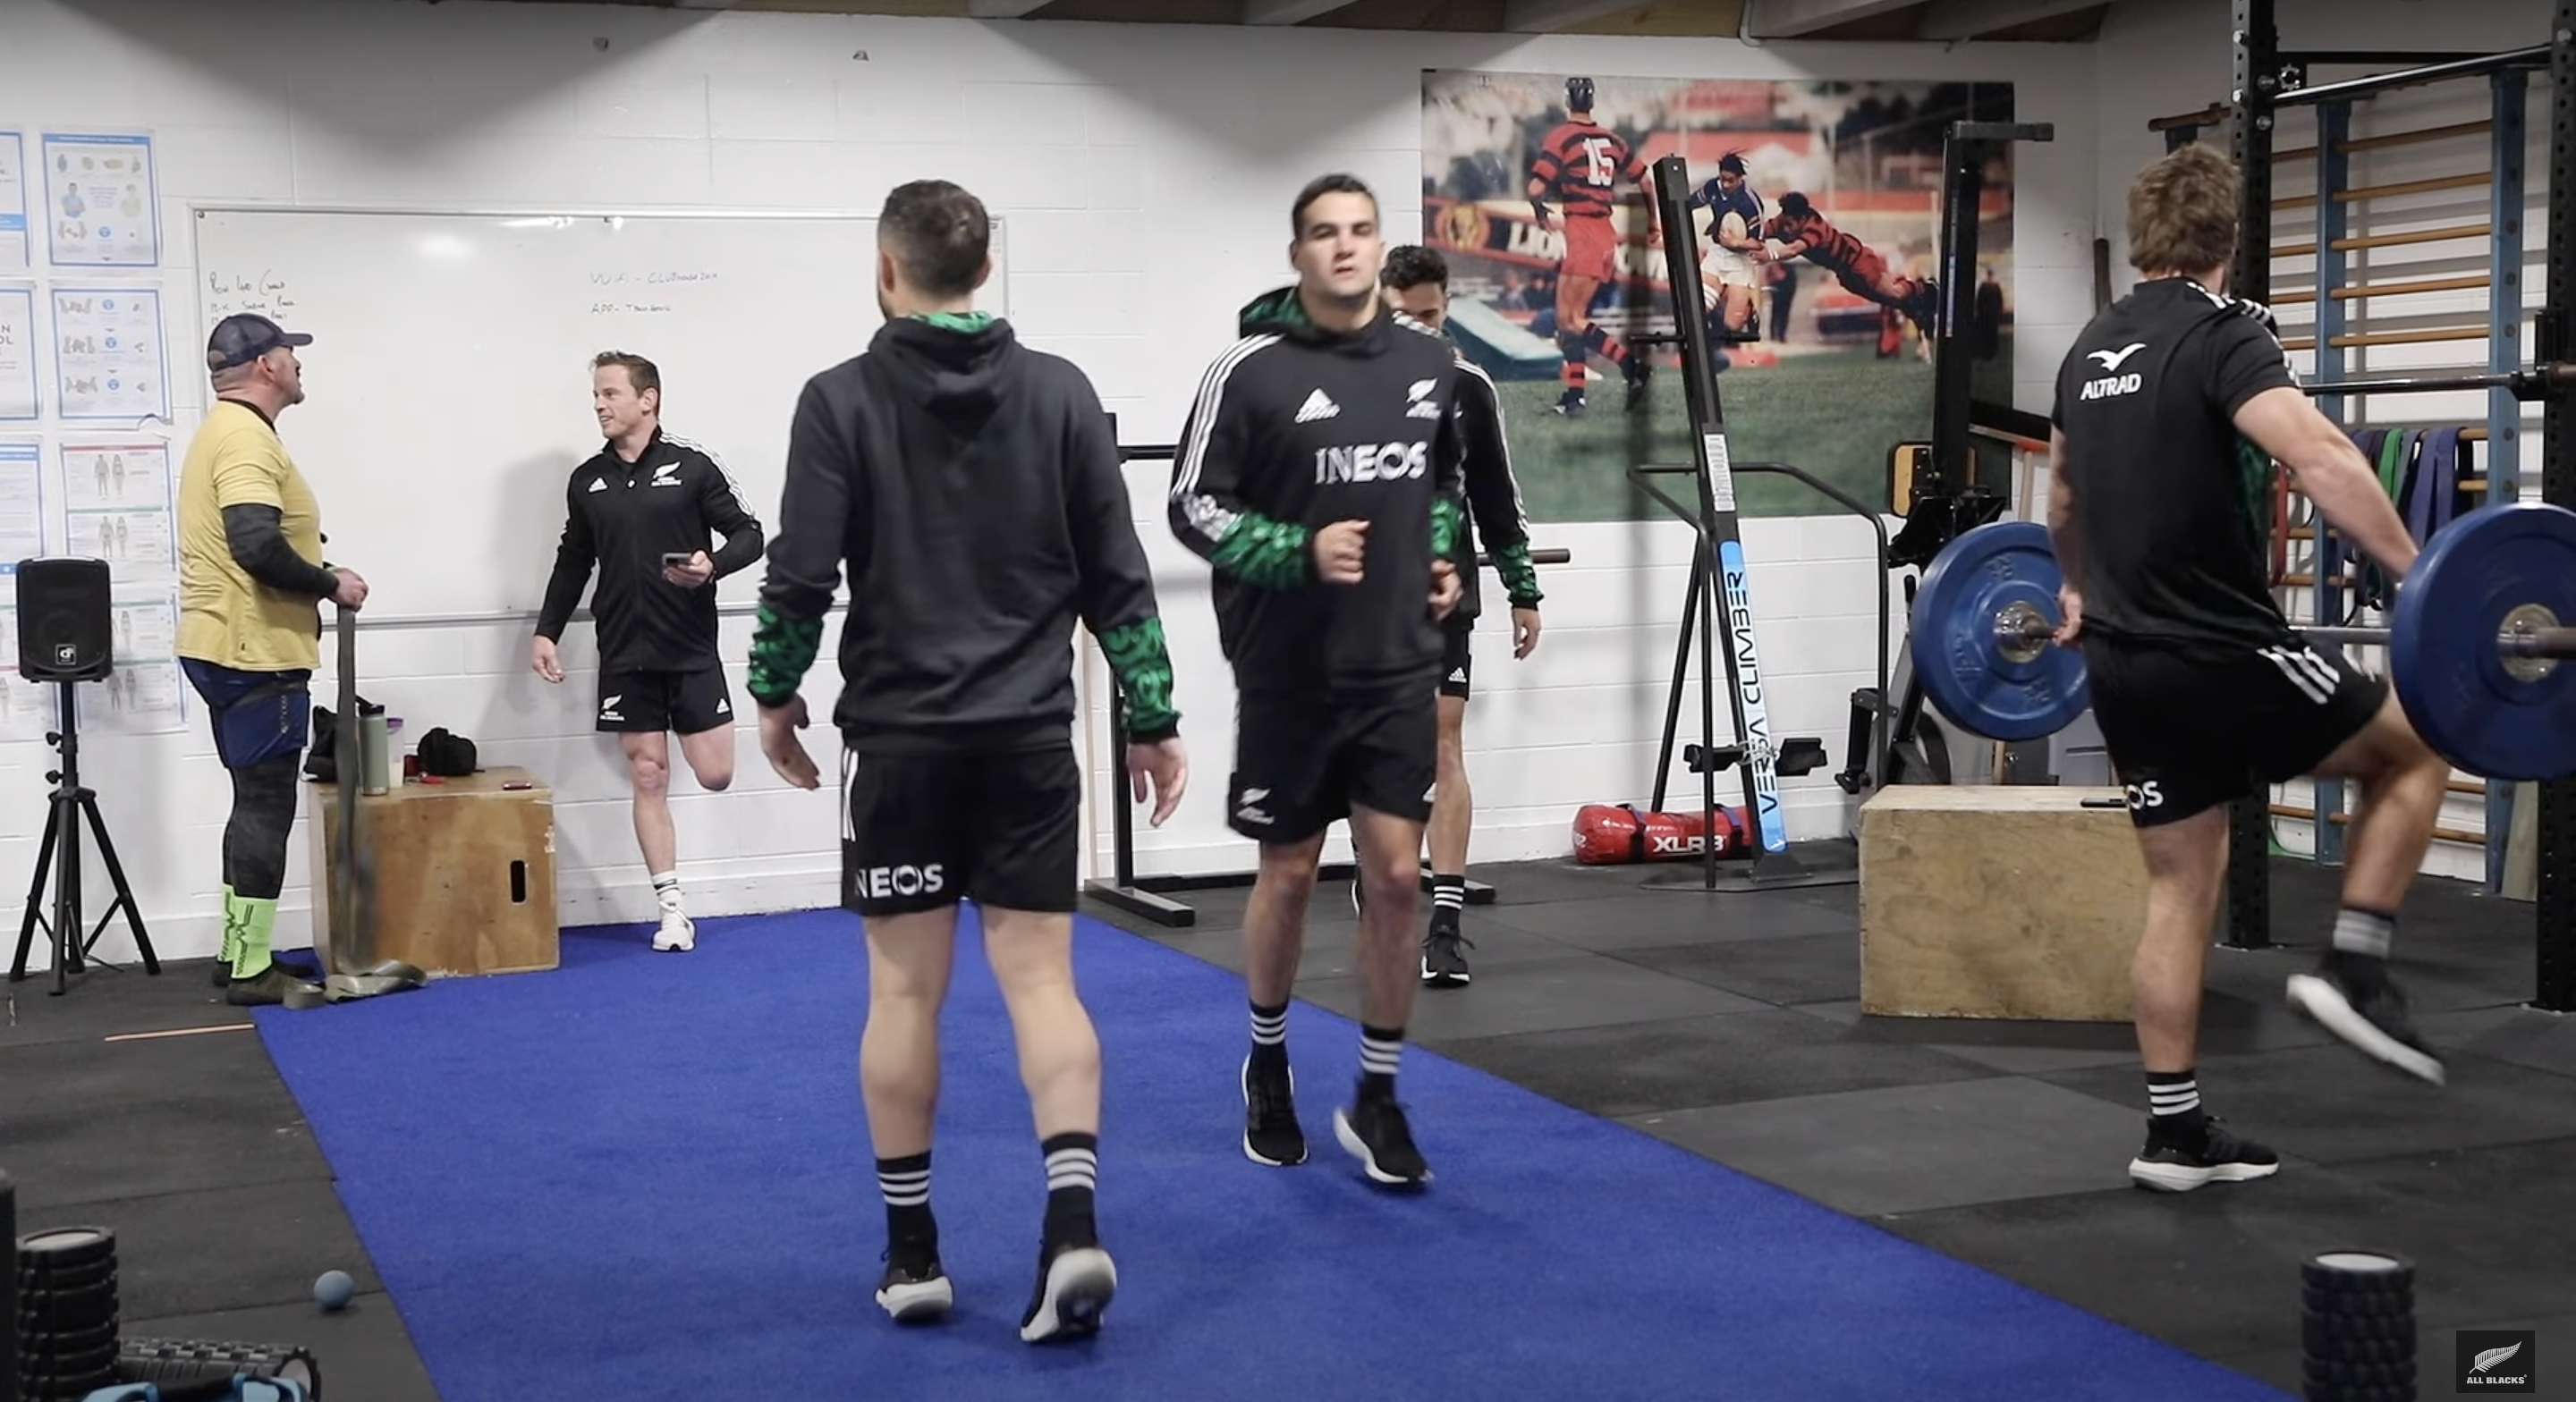 All Blacks coach shows up players in the gym